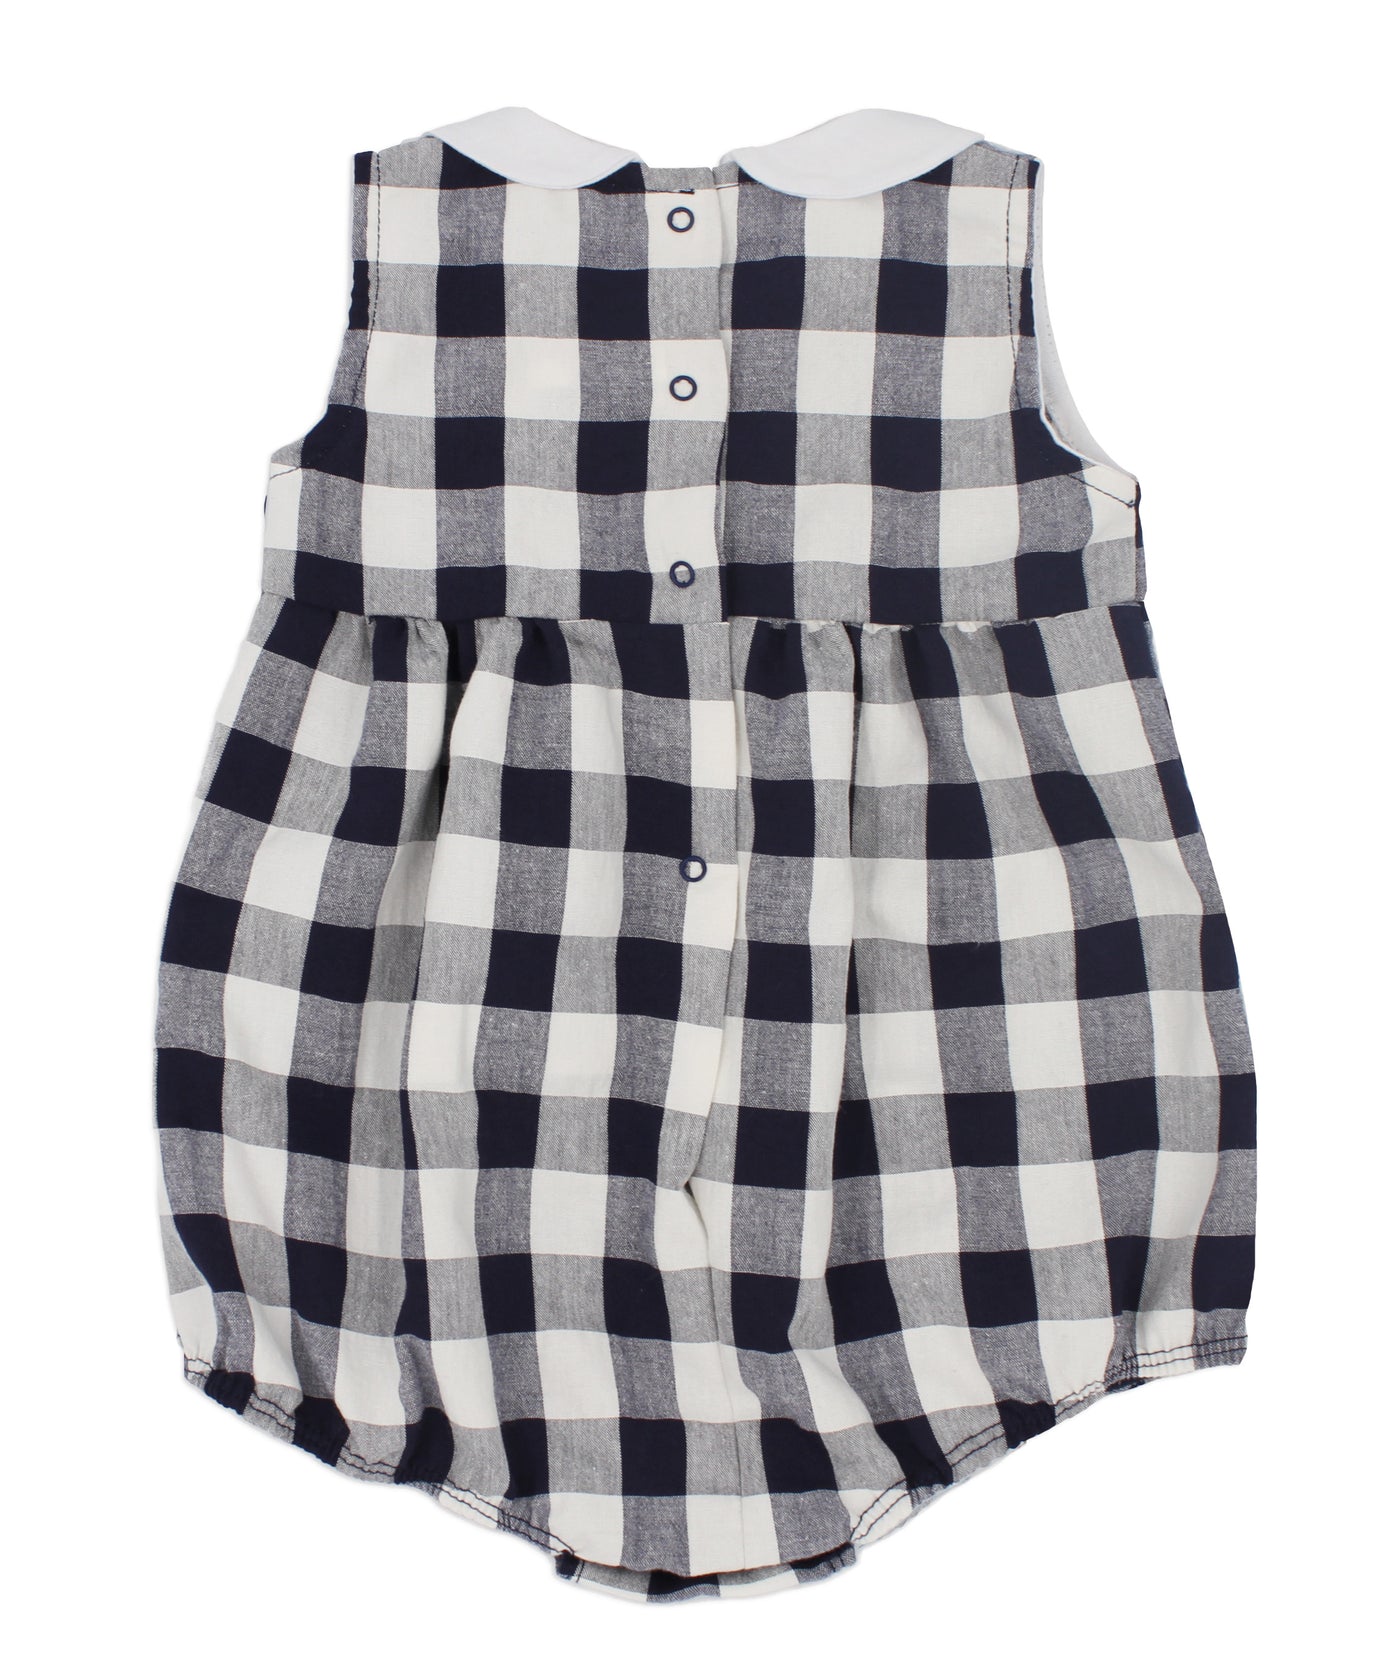 Navy Blue Gingham Peter Pan Collar Romper by Rapife